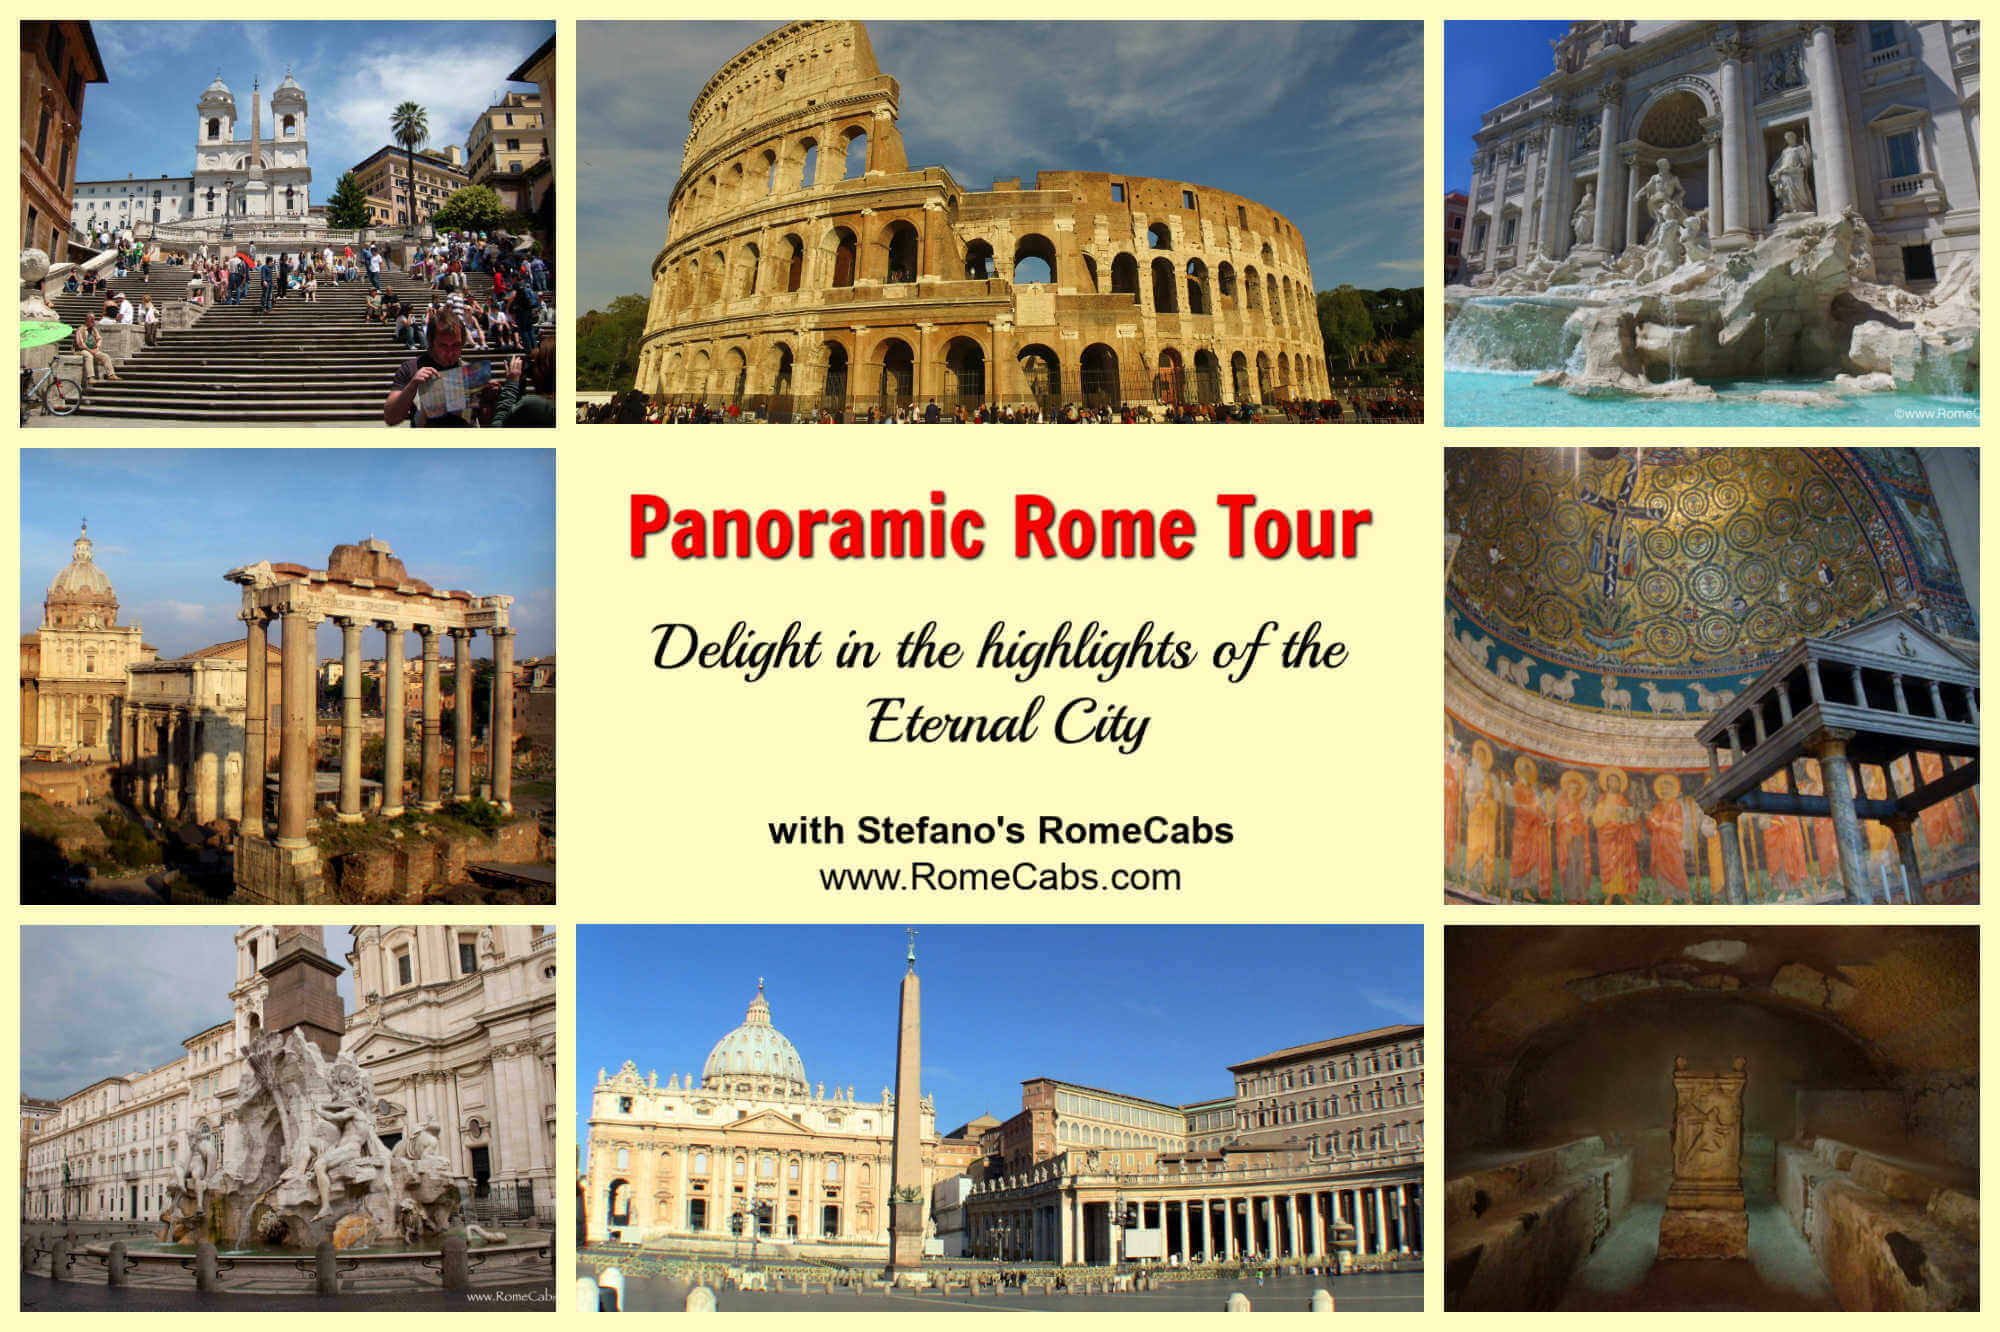 Panoramic Rome tour for Cruisers 5 most popular Tours of Rome with RomeCabs